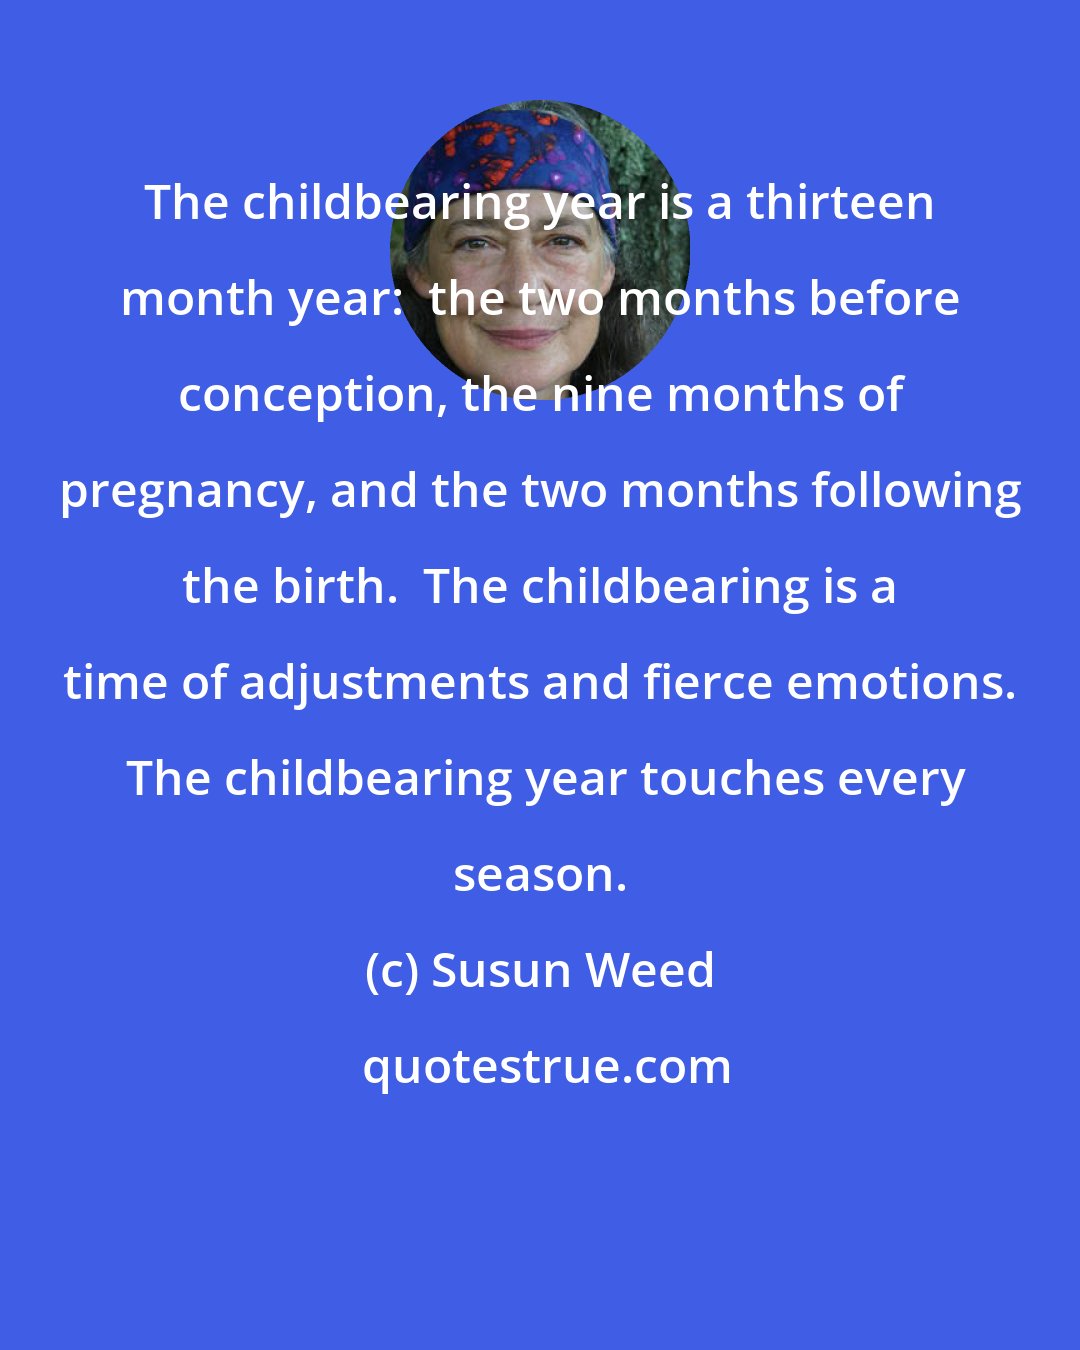 Susun Weed: The childbearing year is a thirteen month year:  the two months before conception, the nine months of pregnancy, and the two months following the birth.  The childbearing is a time of adjustments and fierce emotions.  The childbearing year touches every season.